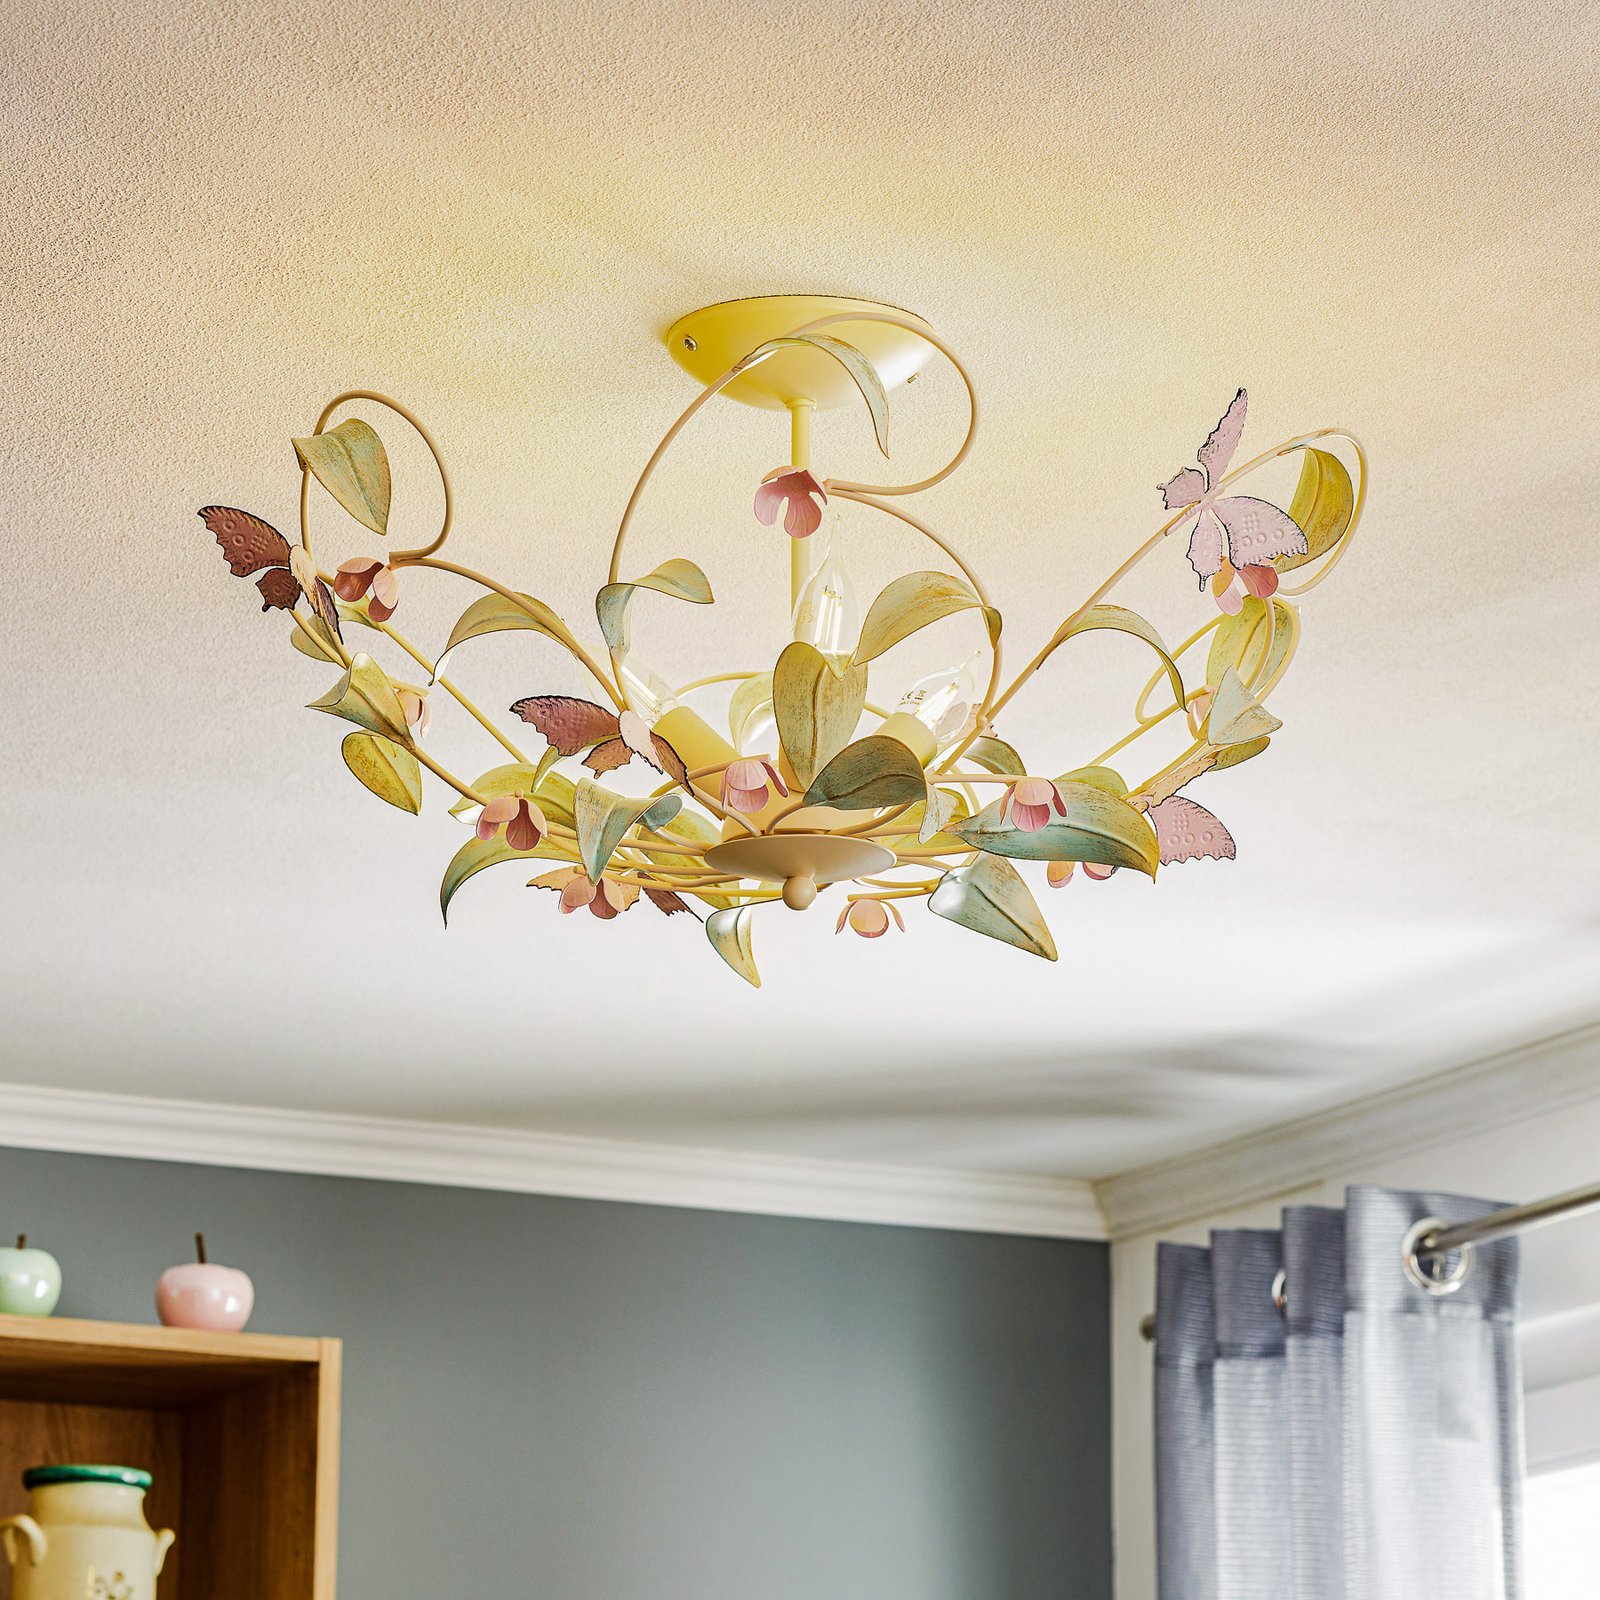 Butterfly ceiling light, white/green/pink, 3-bulb